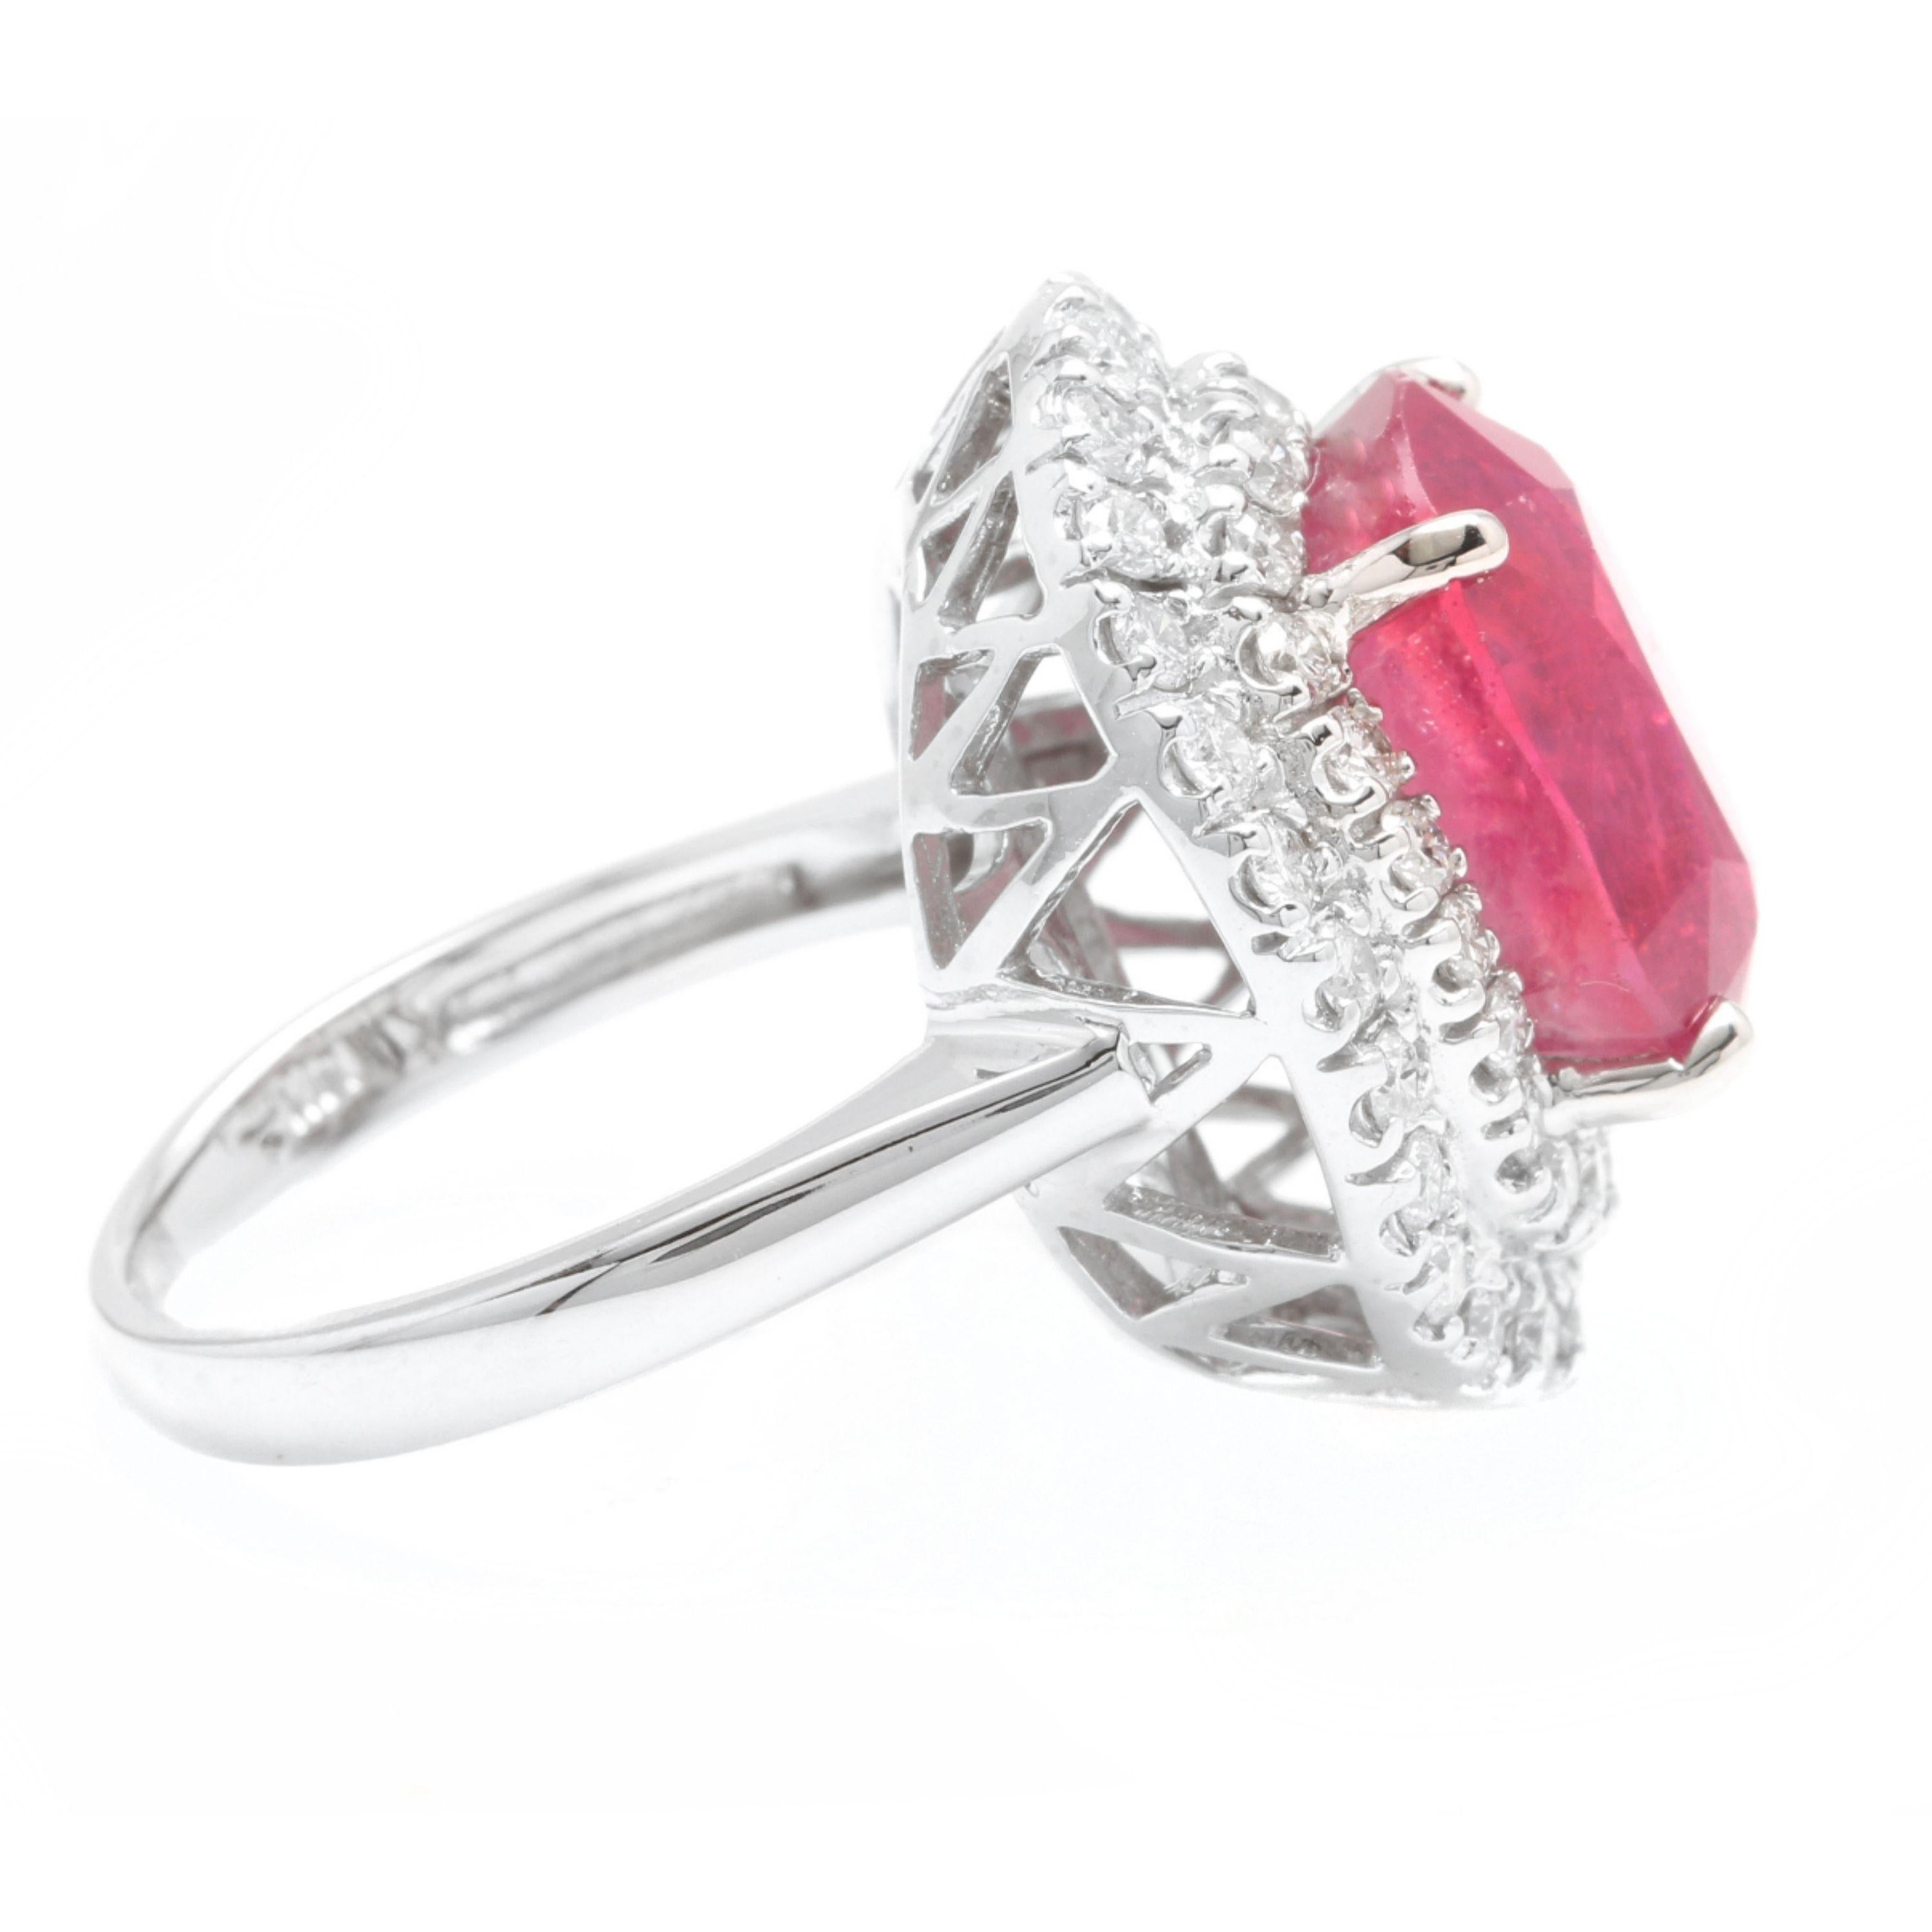 13.50 Carats Lab-Created Ruby and Natural Diamond 14K Solid White Gold Ring

Total Ruby Weight is Approx. : 12.00 Carats

Ruby Measures Approx. : 14 x 10mm

Natural Round Diamonds Weight: Approx. 1.50 Carats (color G-H / Clarity SI1-SI2)

Ring size: